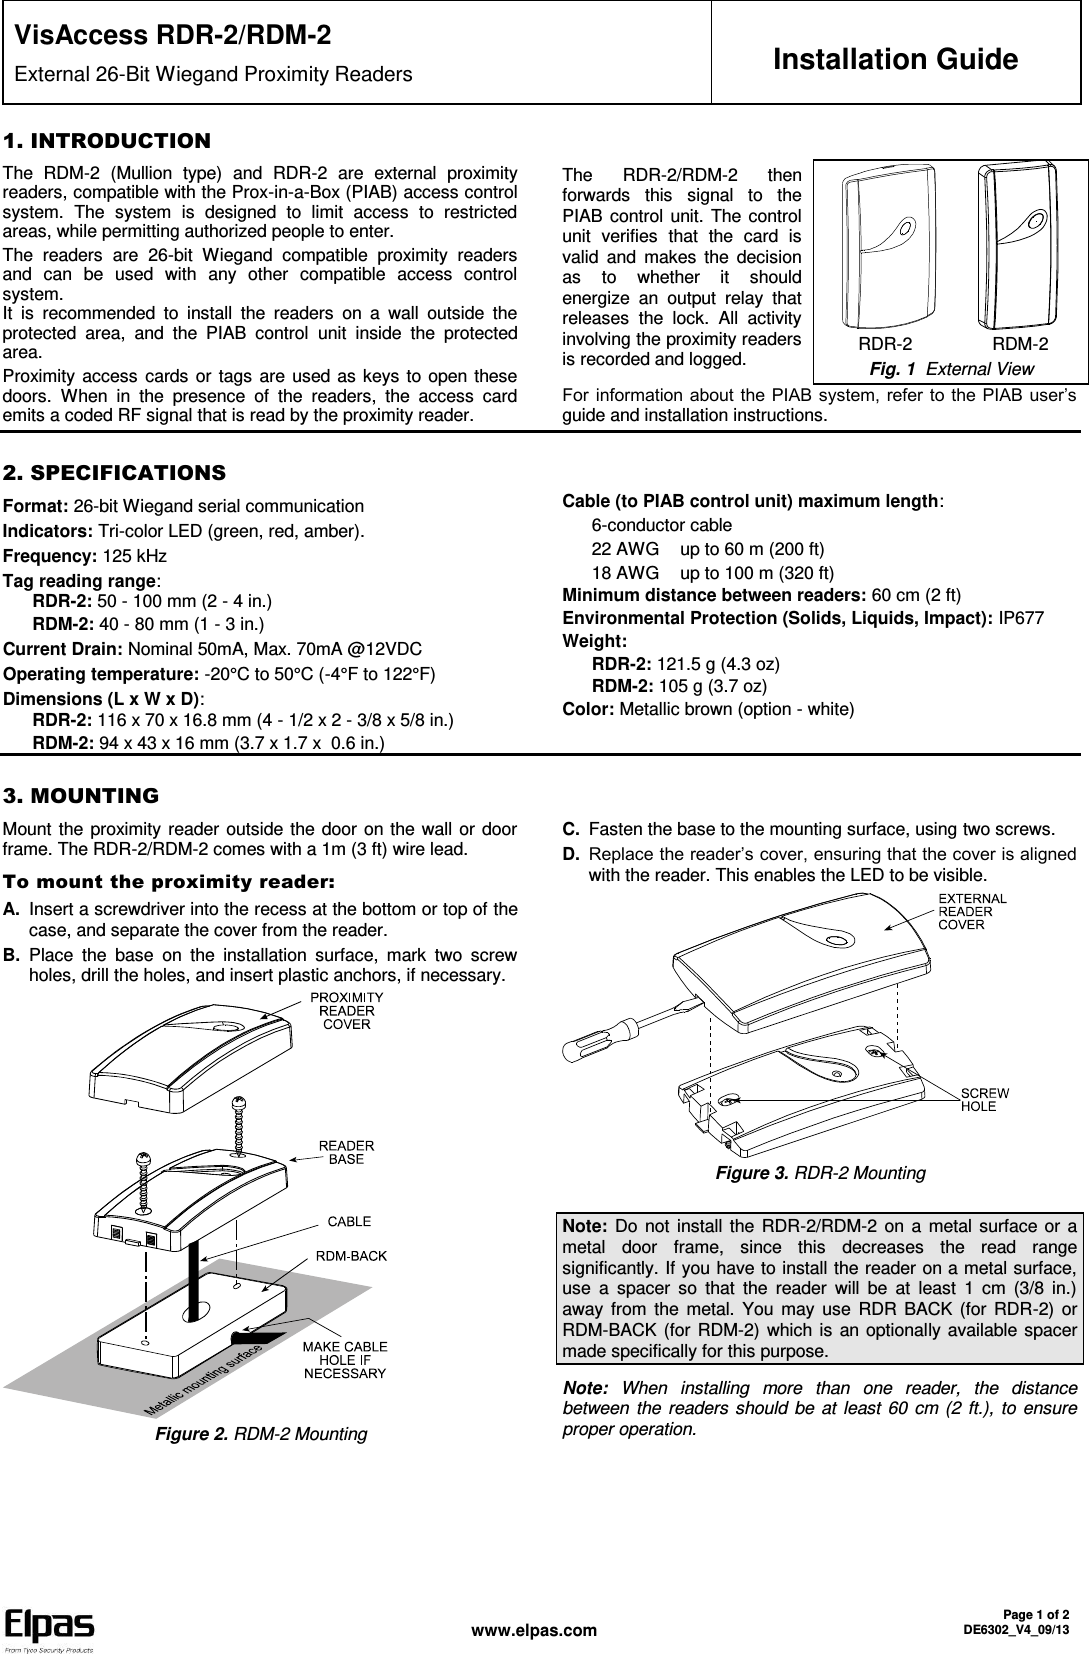  www.elpas.com Page 1 of 2 DE6302_V4_09/13   VisAccess RDR-2/RDM-2 External 26-Bit Wiegand Proximity Readers  Installation Guide 1. INTRODUCTION The  RDM-2  (Mullion  type)  and  RDR-2  are  external  proximity readers, compatible with the Prox-in-a-Box (PIAB) access control system.  The  system  is  designed  to  limit  access  to  restricted areas, while permitting authorized people to enter.  The  readers  are  26-bit  Wiegand  compatible  proximity  readers and  can  be  used  with  any  other  compatible  access  control system.  It  is  recommended  to  install  the  readers  on  a  wall  outside  the protected  area,  and  the  PIAB  control  unit  inside  the  protected area. Proximity access  cards or tags are used as keys to open these doors.  When  in  the  presence  of  the  readers,  the  access  card emits a coded RF signal that is read by the proximity reader. The  RDR-2/RDM-2  then forwards  this  signal  to  the PIAB control unit. The control unit  verifies  that  the  card  is valid  and  makes  the decision as  to  whether  it  should energize  an  output  relay  that releases  the  lock.  All  activity involving the proximity readers is recorded and logged.            RDR-2                RDM-2 Fig. 1  External View For information about the PIAB system, refer to the PIAB user’s guide and installation instructions.    2. SPECIFICATIONS Format: 26-bit Wiegand serial communication  Indicators: Tri-color LED (green, red, amber). Frequency: 125 kHz Tag reading range: RDR-2: 50 - 100 mm (2 - 4 in.) RDM-2: 40 - 80 mm (1 - 3 in.) Current Drain: Nominal 50mA, Max. 70mA @12VDC Operating temperature: -20°C to 50°C (-4°F to 122°F)  Dimensions (L x W x D): RDR-2: 116 x 70 x 16.8 mm (4 - 1/2 x 2 - 3/8 x 5/8 in.) RDM-2: 94 x 43 x 16 mm (3.7 x 1.7 x  0.6 in.) Cable (to PIAB control unit) maximum length:  6-conductor cable 22 AWG  up to 60 m (200 ft) 18 AWG  up to 100 m (320 ft) Minimum distance between readers: 60 cm (2 ft) Environmental Protection (Solids, Liquids, Impact): IP677 Weight: RDR-2: 121.5 g (4.3 oz) RDM-2: 105 g (3.7 oz) Color: Metallic brown (option - white)   3. MOUNTING Mount the proximity reader outside the door on the wall or door frame. The RDR-2/RDM-2 comes with a 1m (3 ft) wire lead.  To mount the proximity reader: A. Insert a screwdriver into the recess at the bottom or top of the case, and separate the cover from the reader. B. Place  the  base  on  the  installation  surface,  mark  two  screw holes, drill the holes, and insert plastic anchors, if necessary.  Figure 2. RDM-2 Mounting C. Fasten the base to the mounting surface, using two screws. D. Replace the reader’s cover, ensuring that the cover is aligned with the reader. This enables the LED to be visible.  Figure 3. RDR-2 Mounting  Note: Do not install  the RDR-2/RDM-2 on a metal surface or a metal  door  frame,  since  this  decreases  the  read  range significantly. If you have to install the reader on a metal surface, use  a  spacer  so  that  the  reader  will  be  at  least  1  cm  (3/8  in.) away from  the metal.  You  may use  RDR BACK (for  RDR-2)  or RDM-BACK (for RDM-2)  which is an optionally available spacer made specifically for this purpose. Note:  When  installing  more  than  one  reader,  the  distance between the readers should be at least 60 cm (2 ft.), to ensure proper operation. 